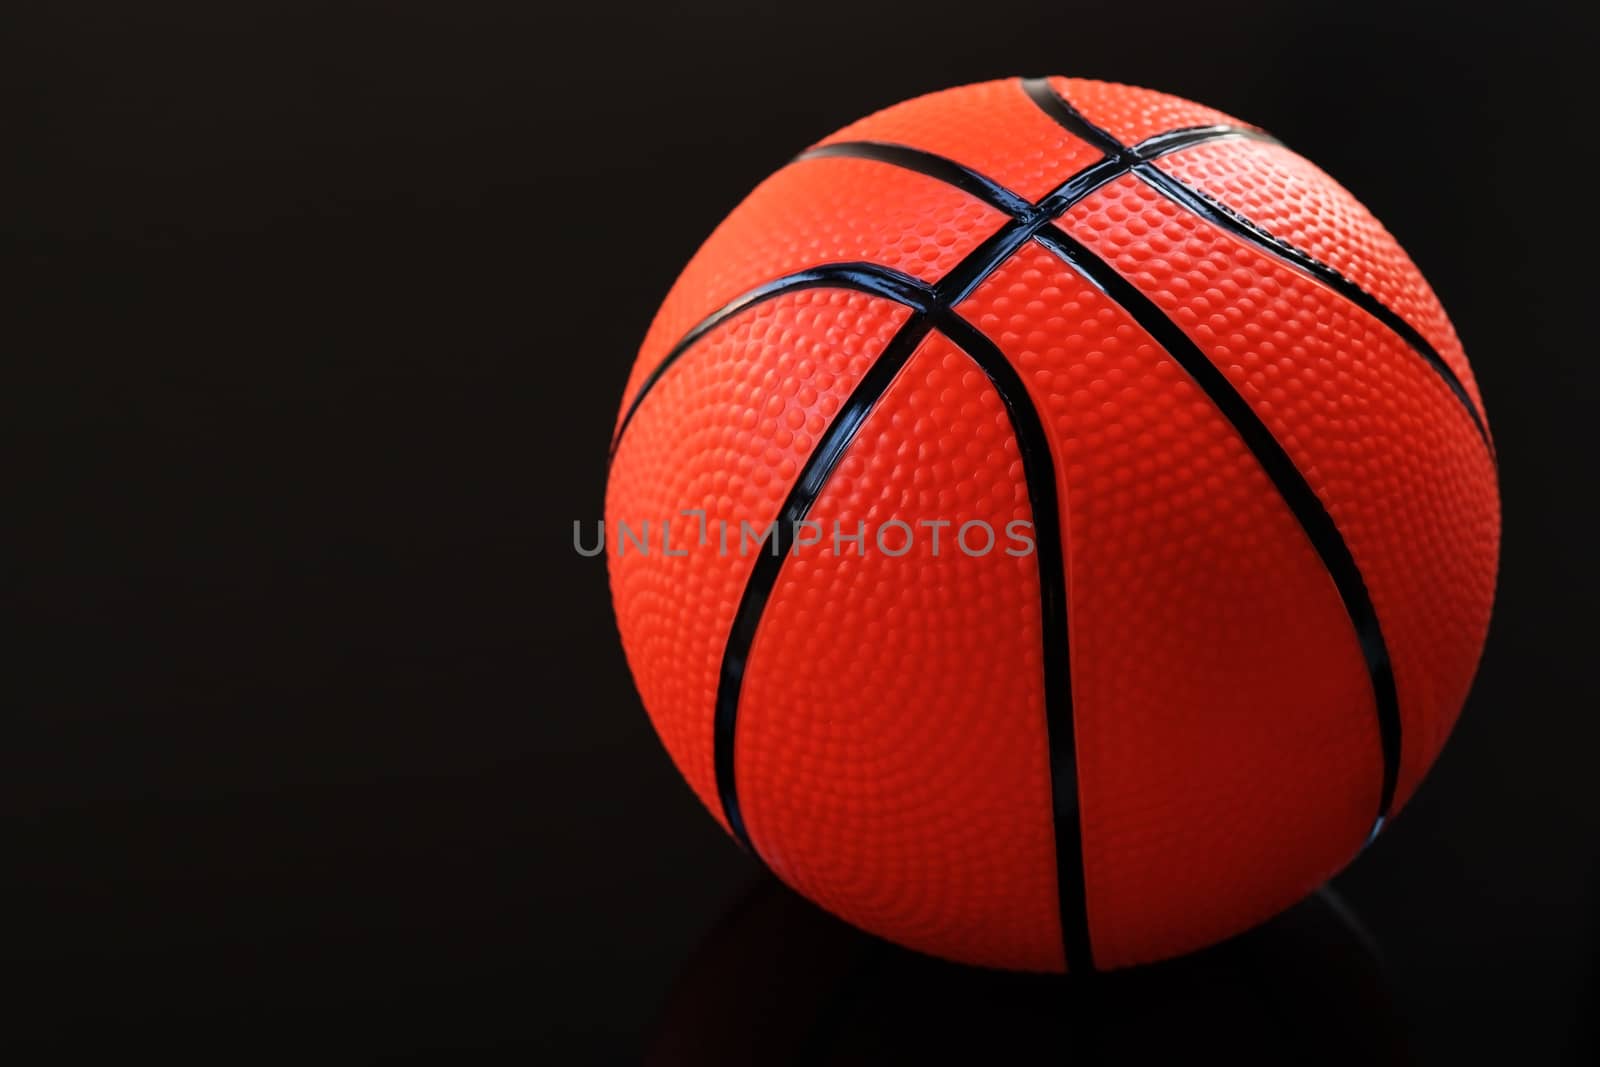 Basketball on a black background as a sports and fitness activit by psodaz